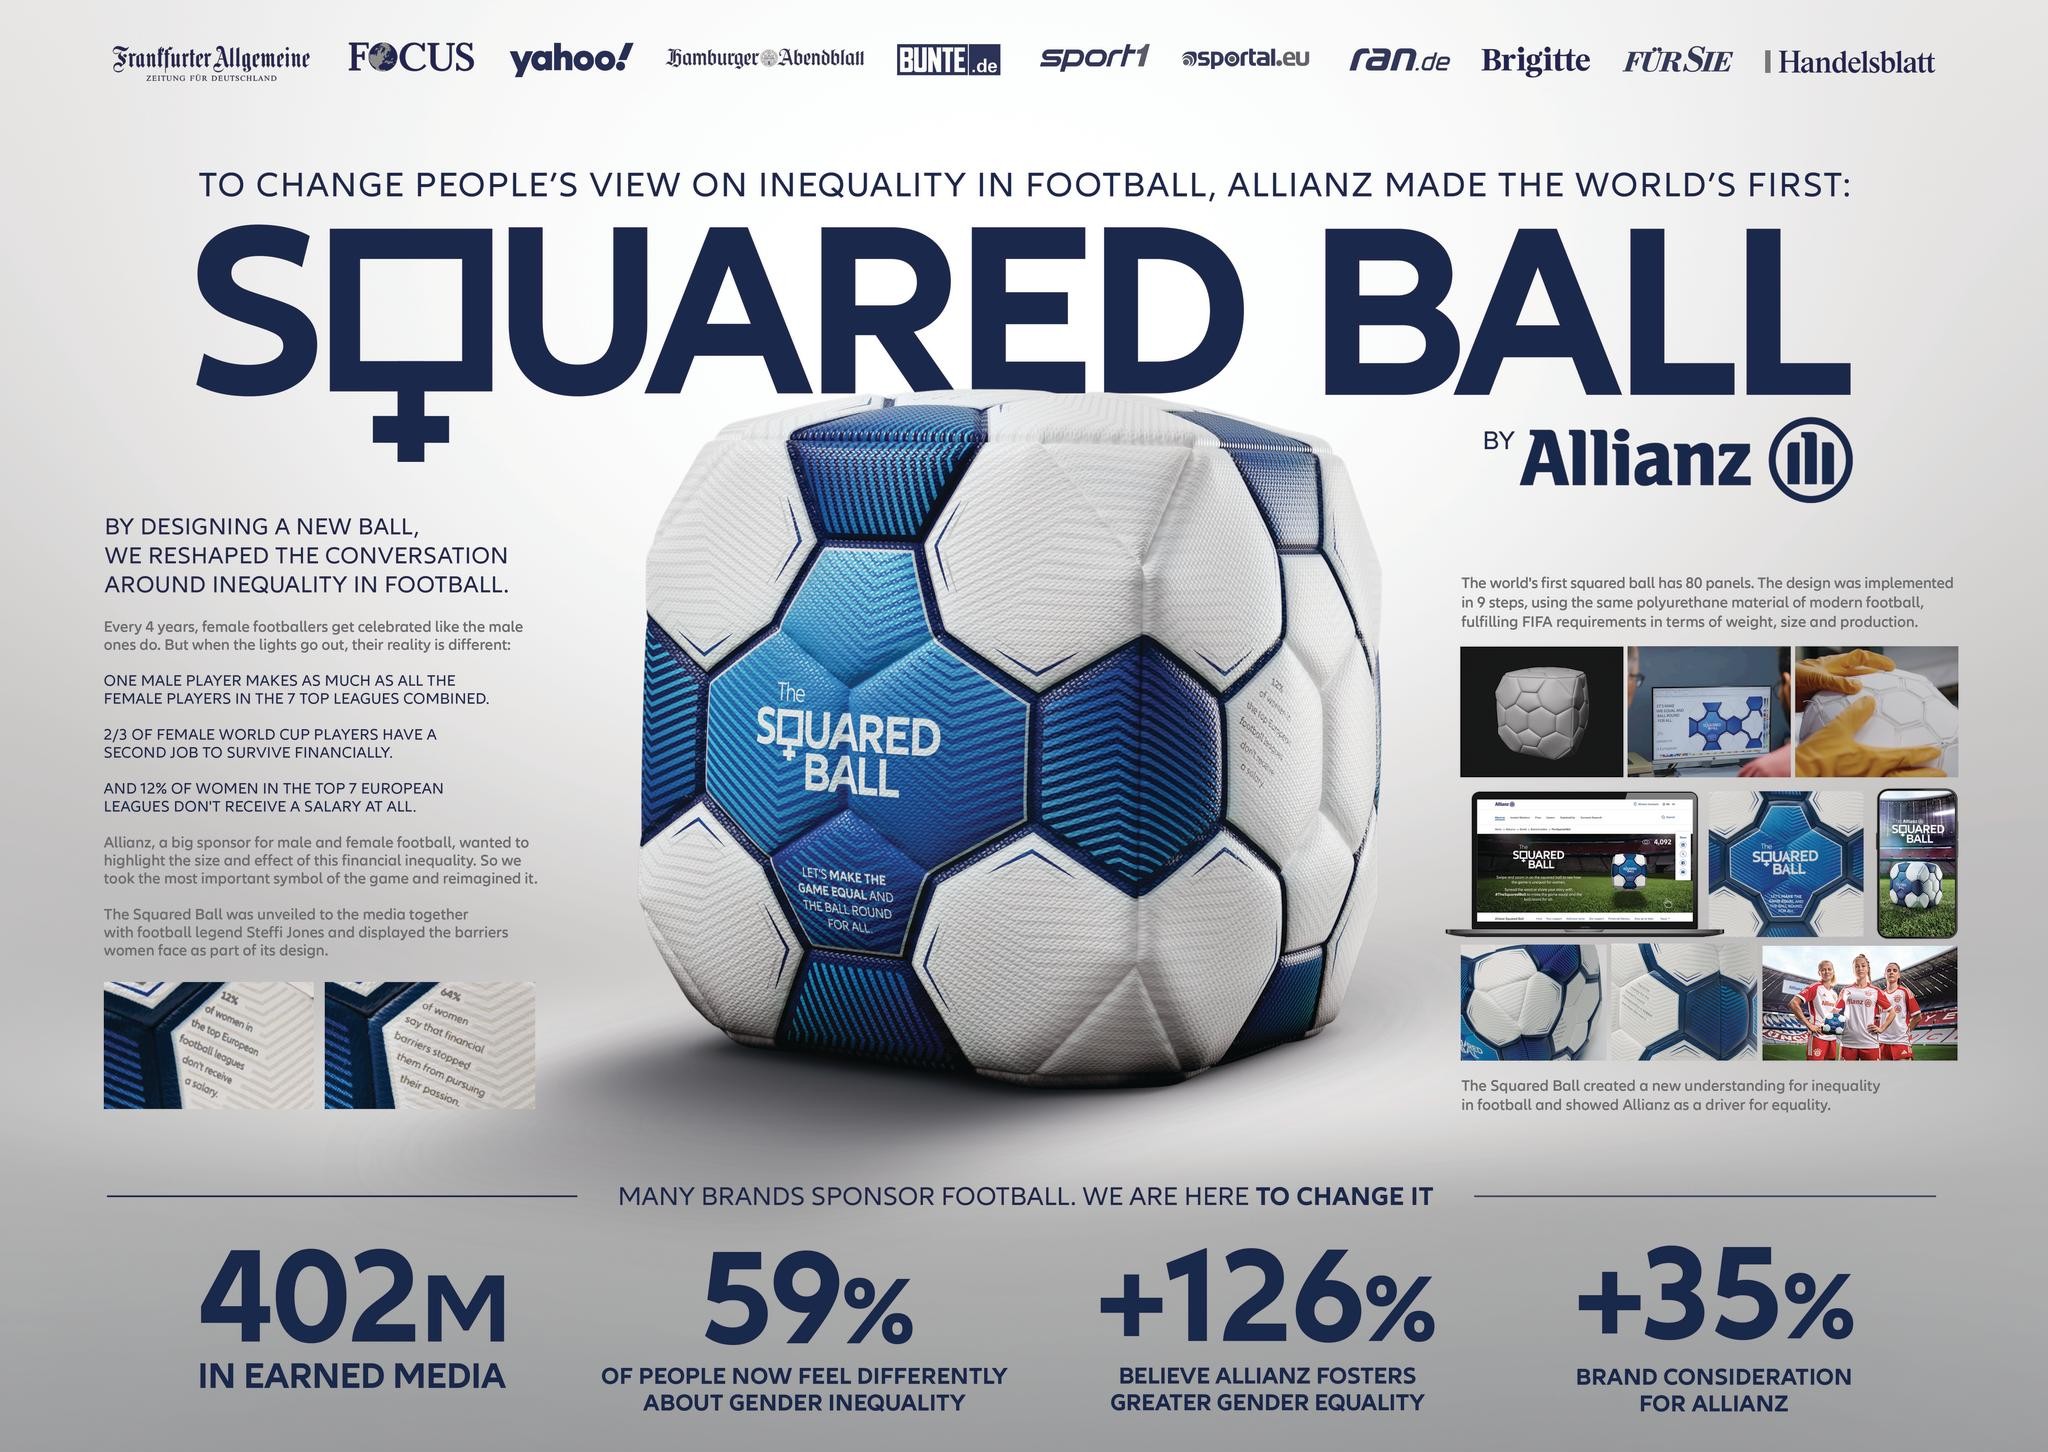 THE SQUARED BALL